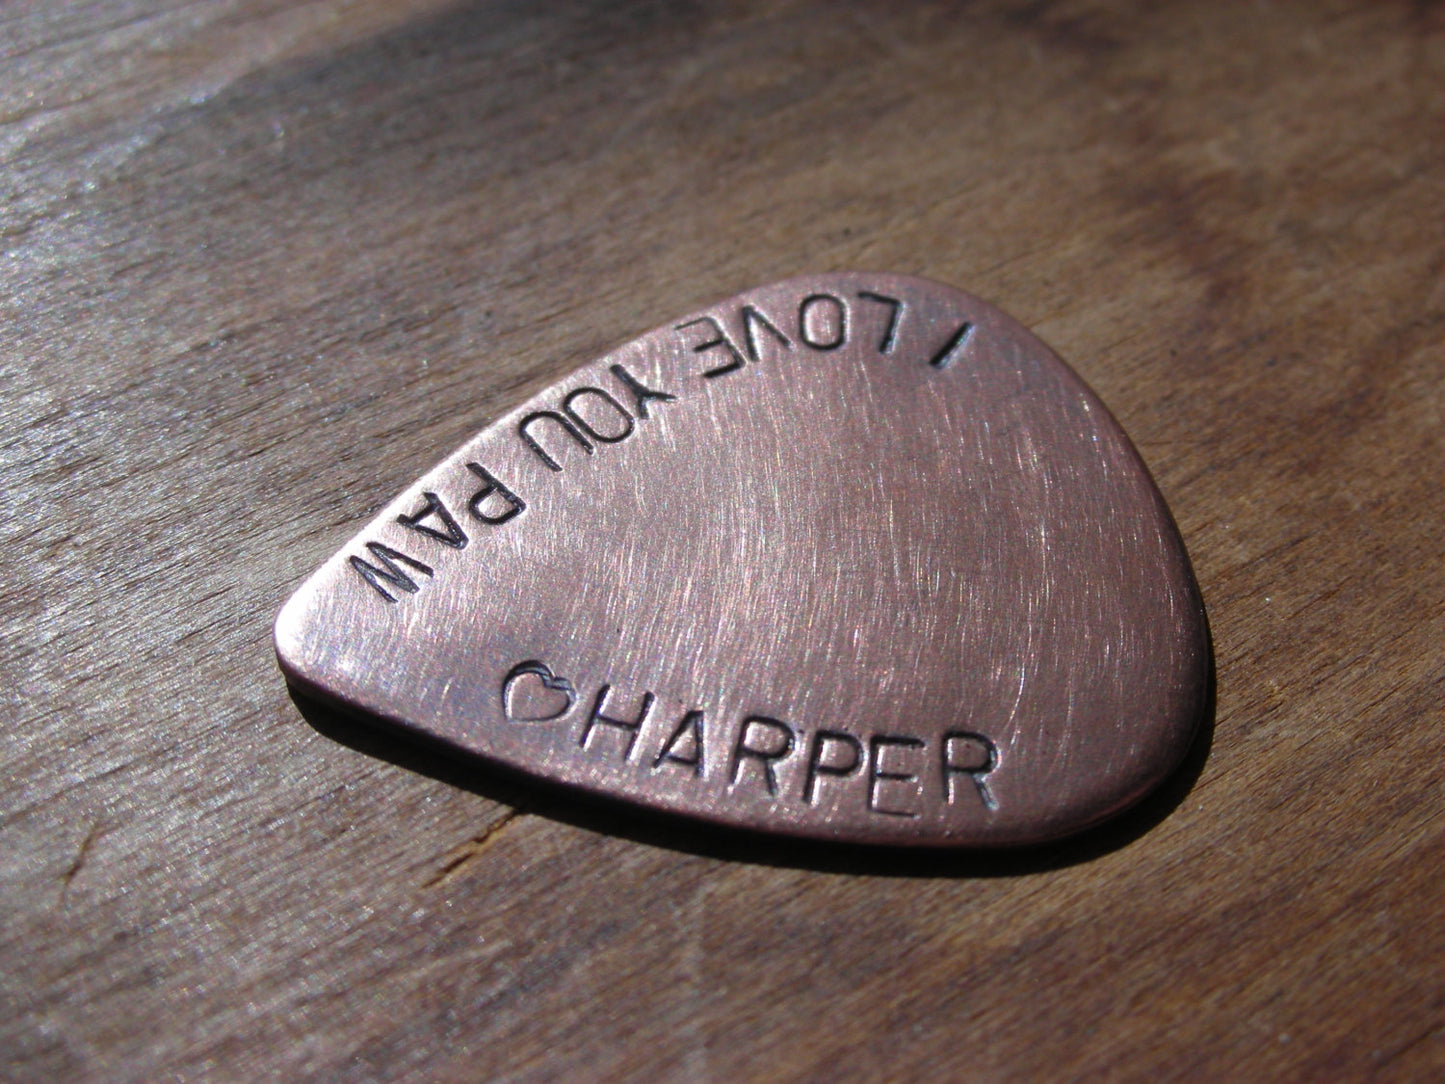 FATHERS DAY GUITAR Pick--Handstamped Copper-Great Gift for Fathers Day, Husband, Boyfriend, Dad, Groomsmen